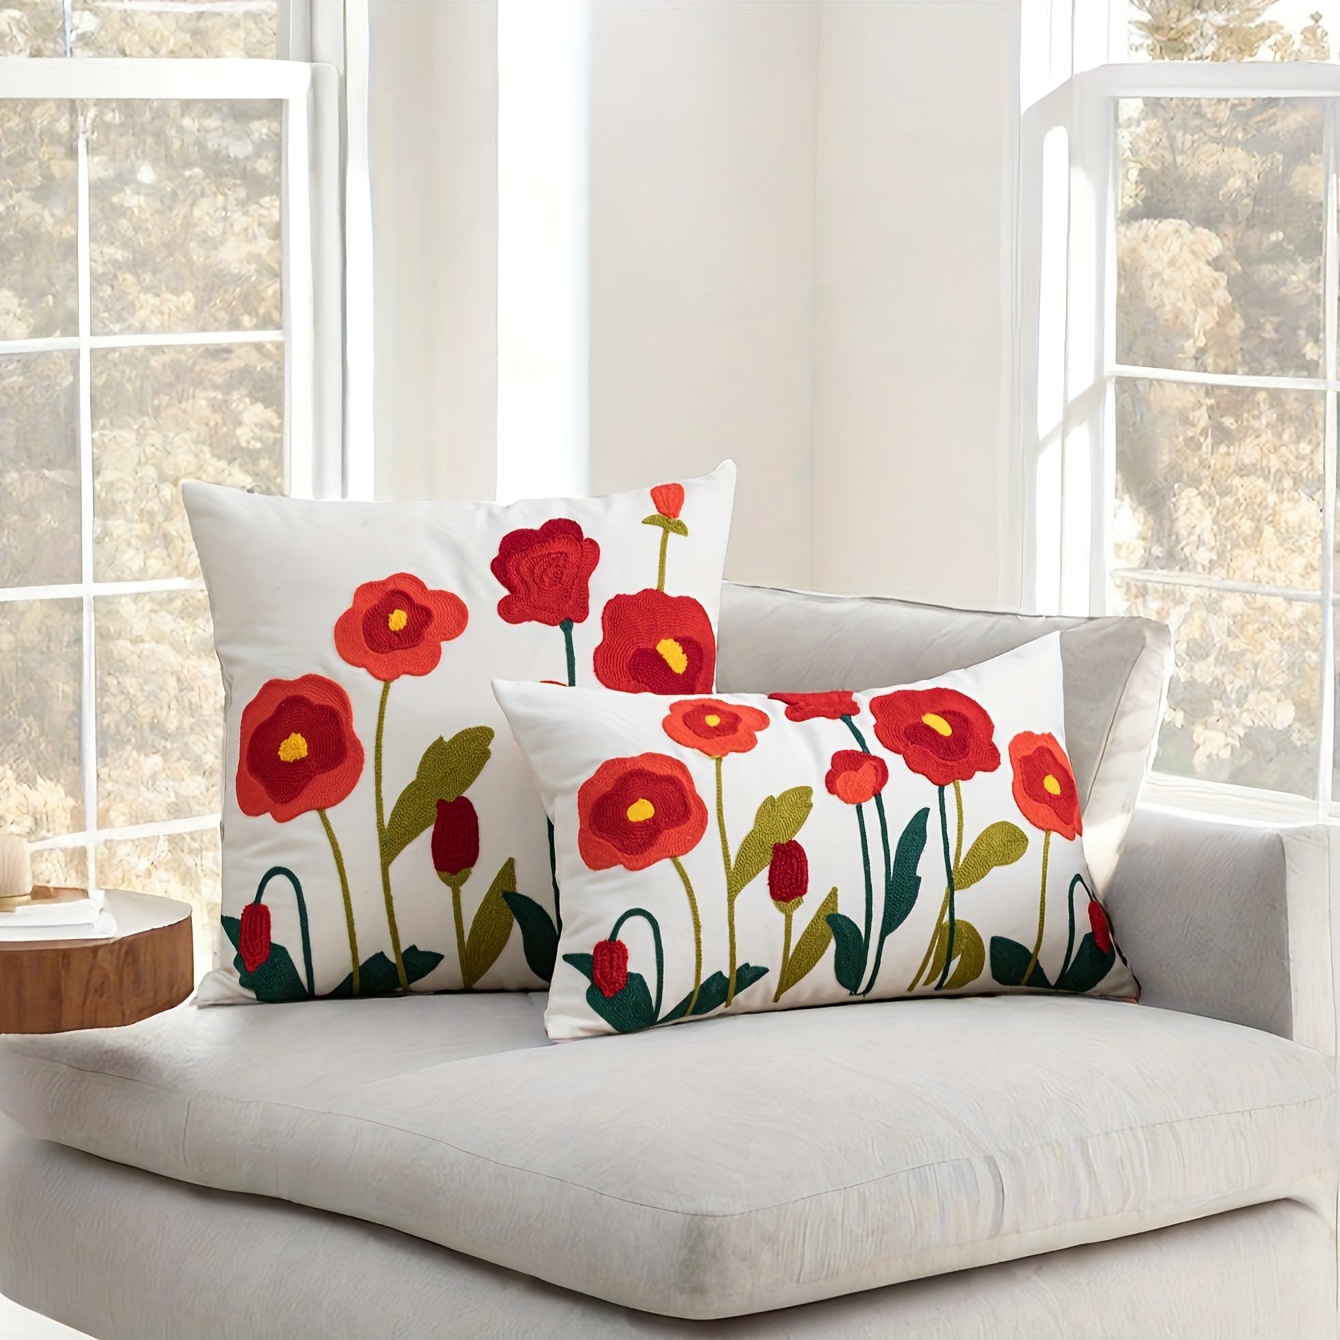 

Modern Floral Embroidered Throw Pillow Cover - Zippered, Machine Washable Polyester Cushion Case For Sofa & Living Room Decor, Fits Multiple Room Styles - 1pc (no Insert)